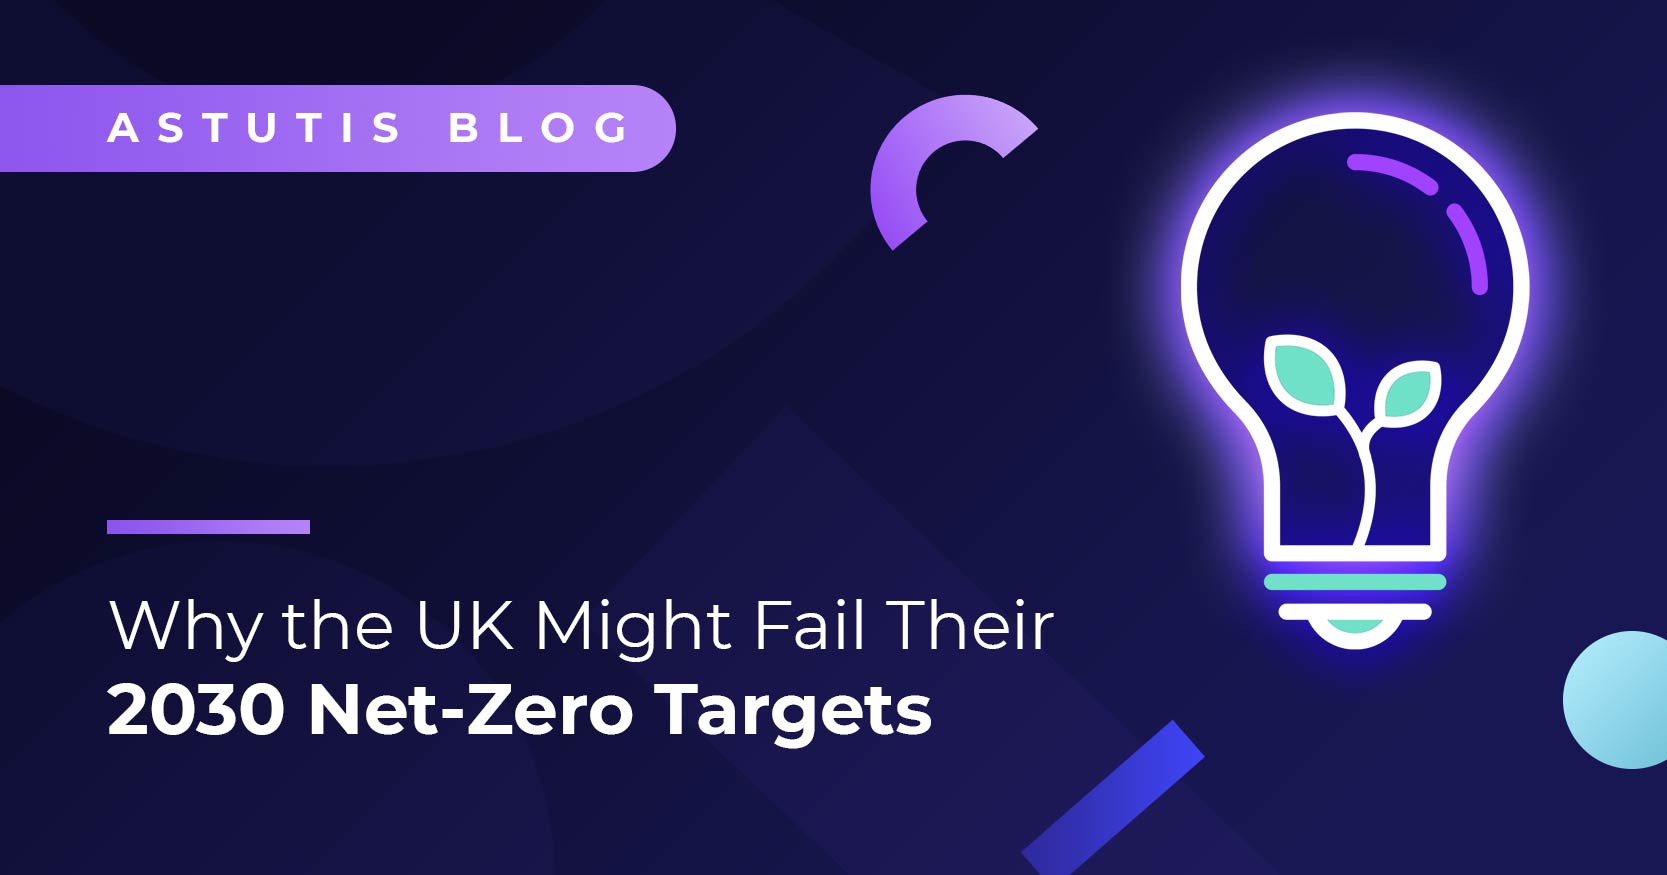 Why the UK Might Fail Their 2030 Net-Zero Targets Image